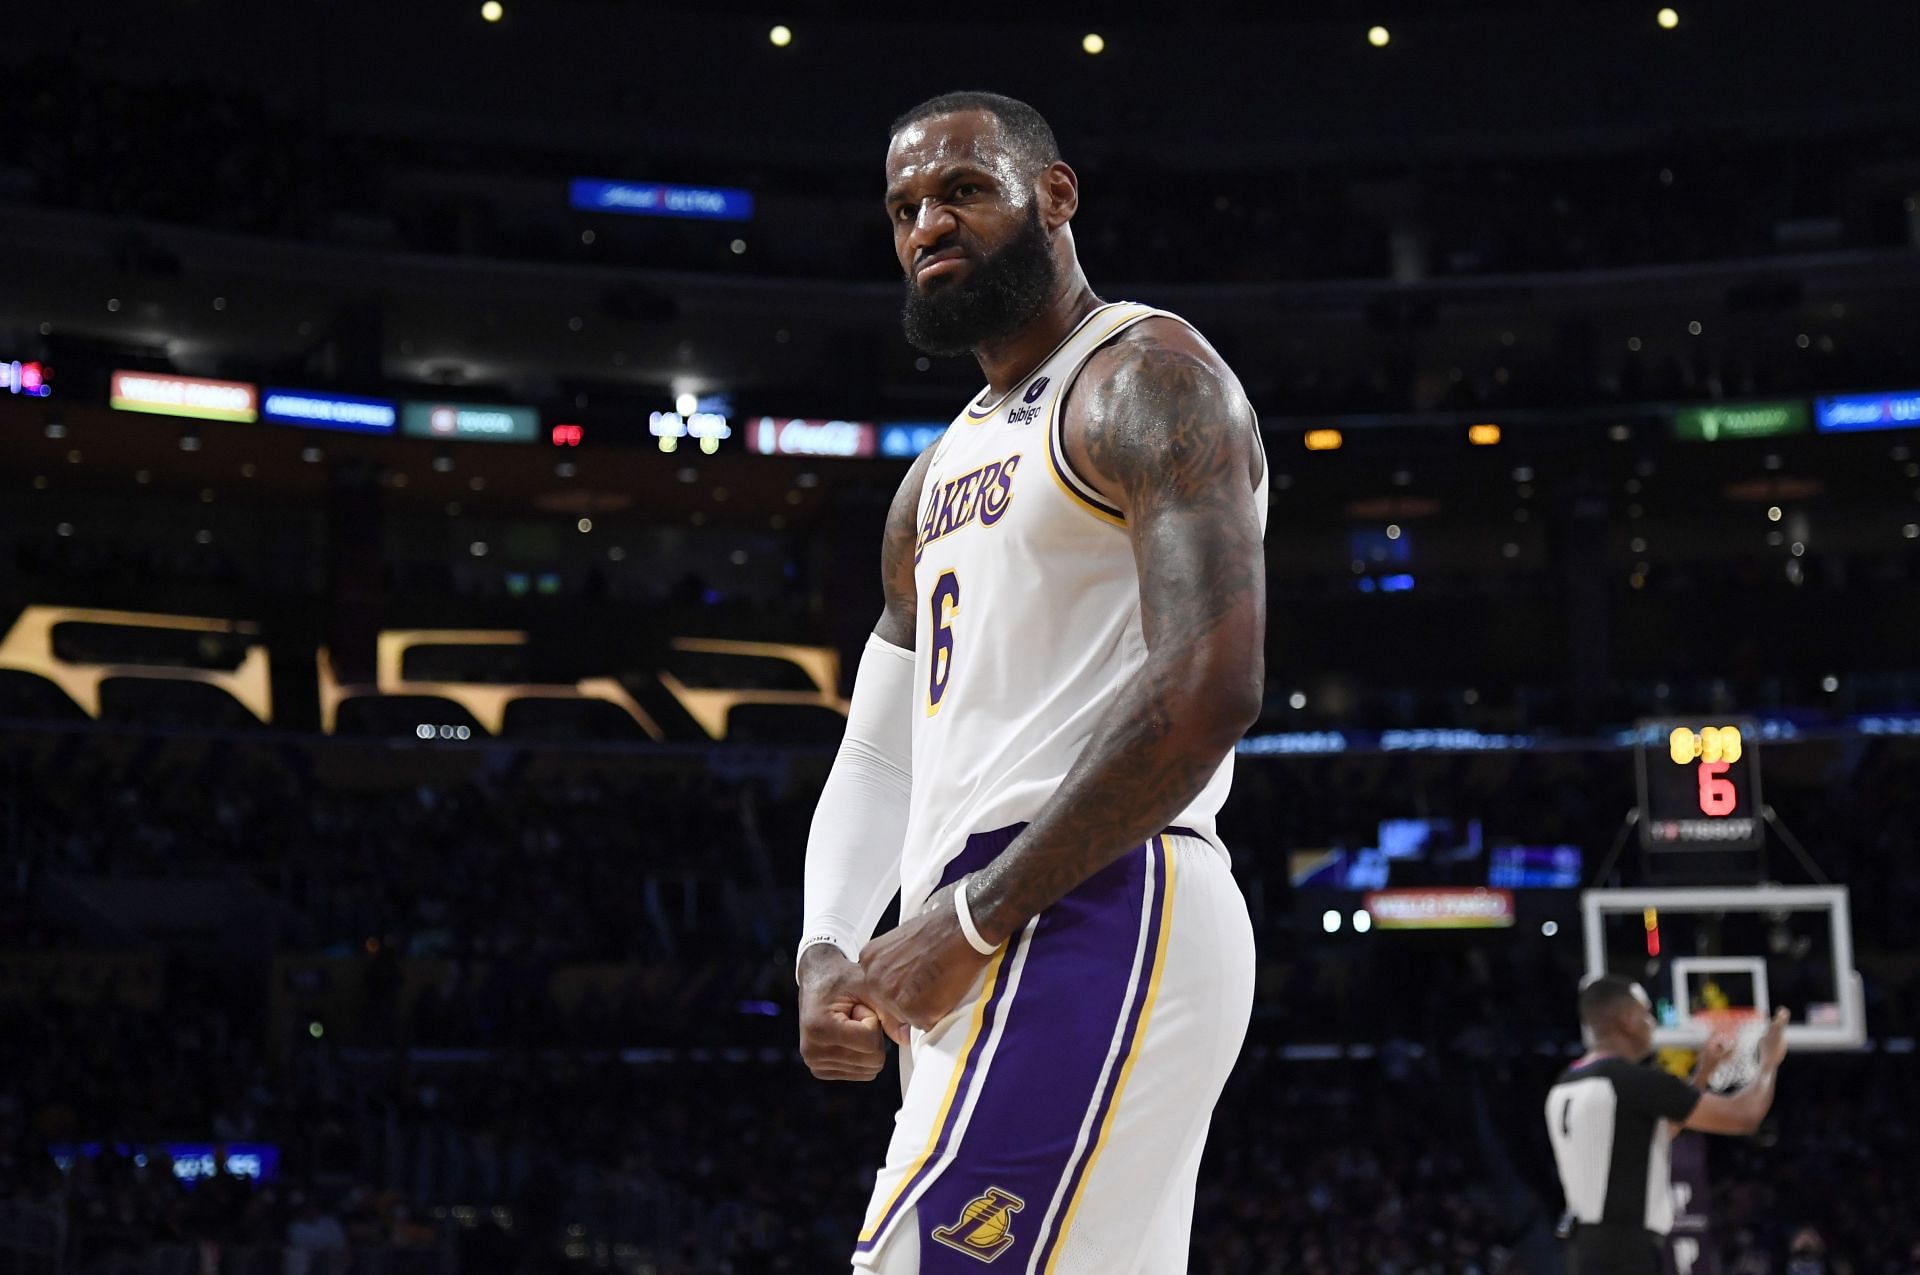 LeBron James and the Los Angeles Lakers versus the Orlando Magic